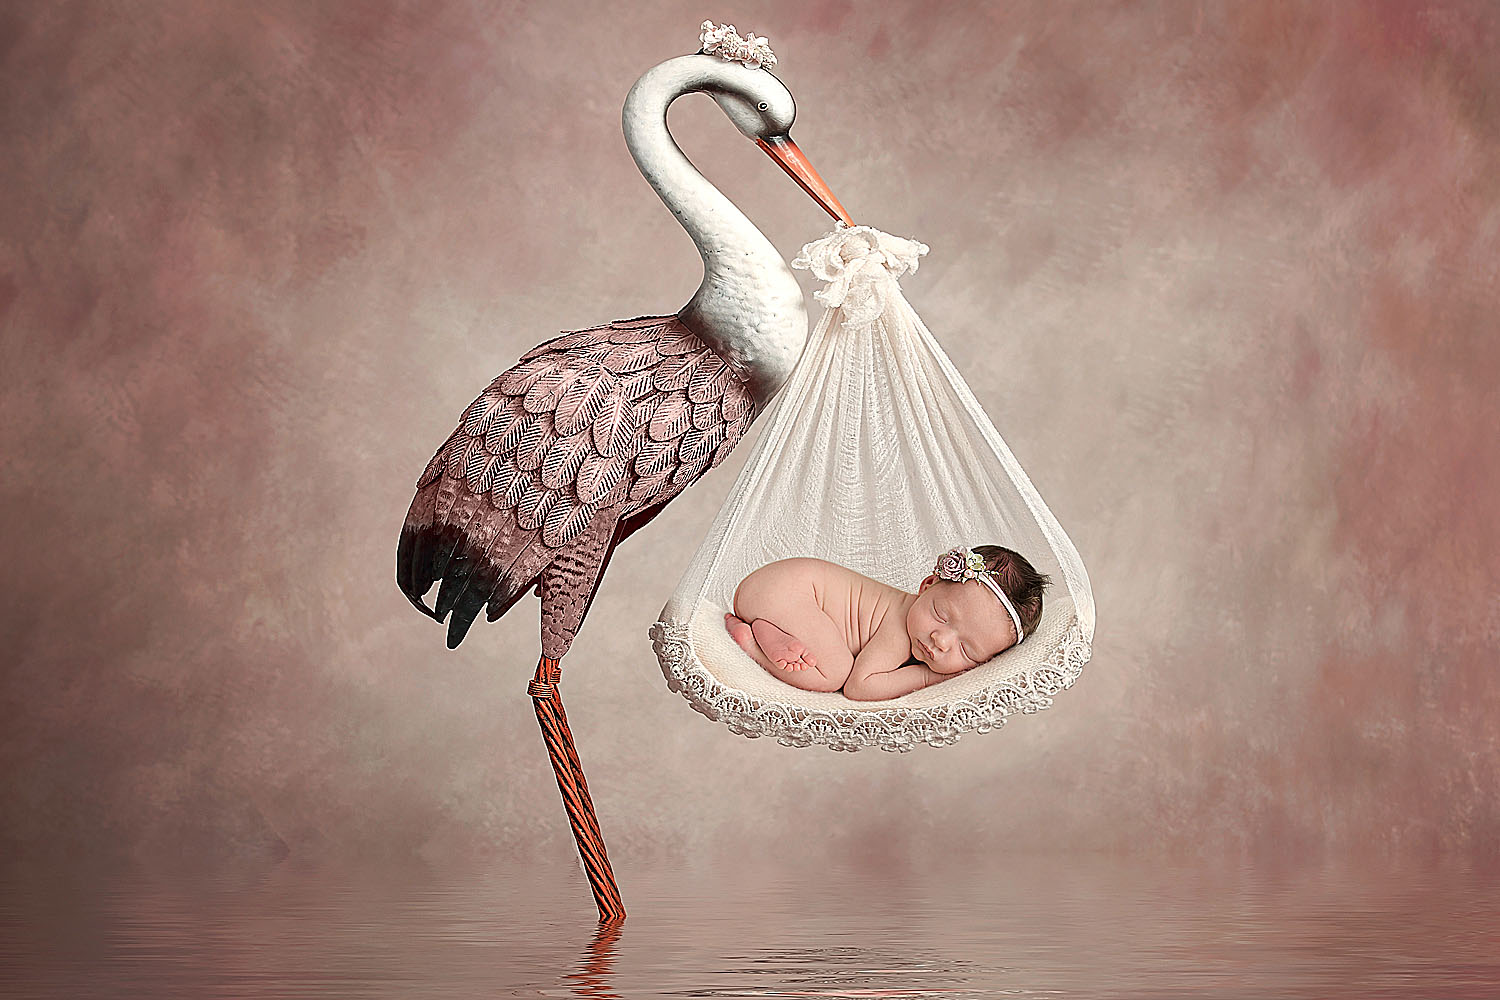 stork carrying newborn baby photoshoot in hollywood photographer